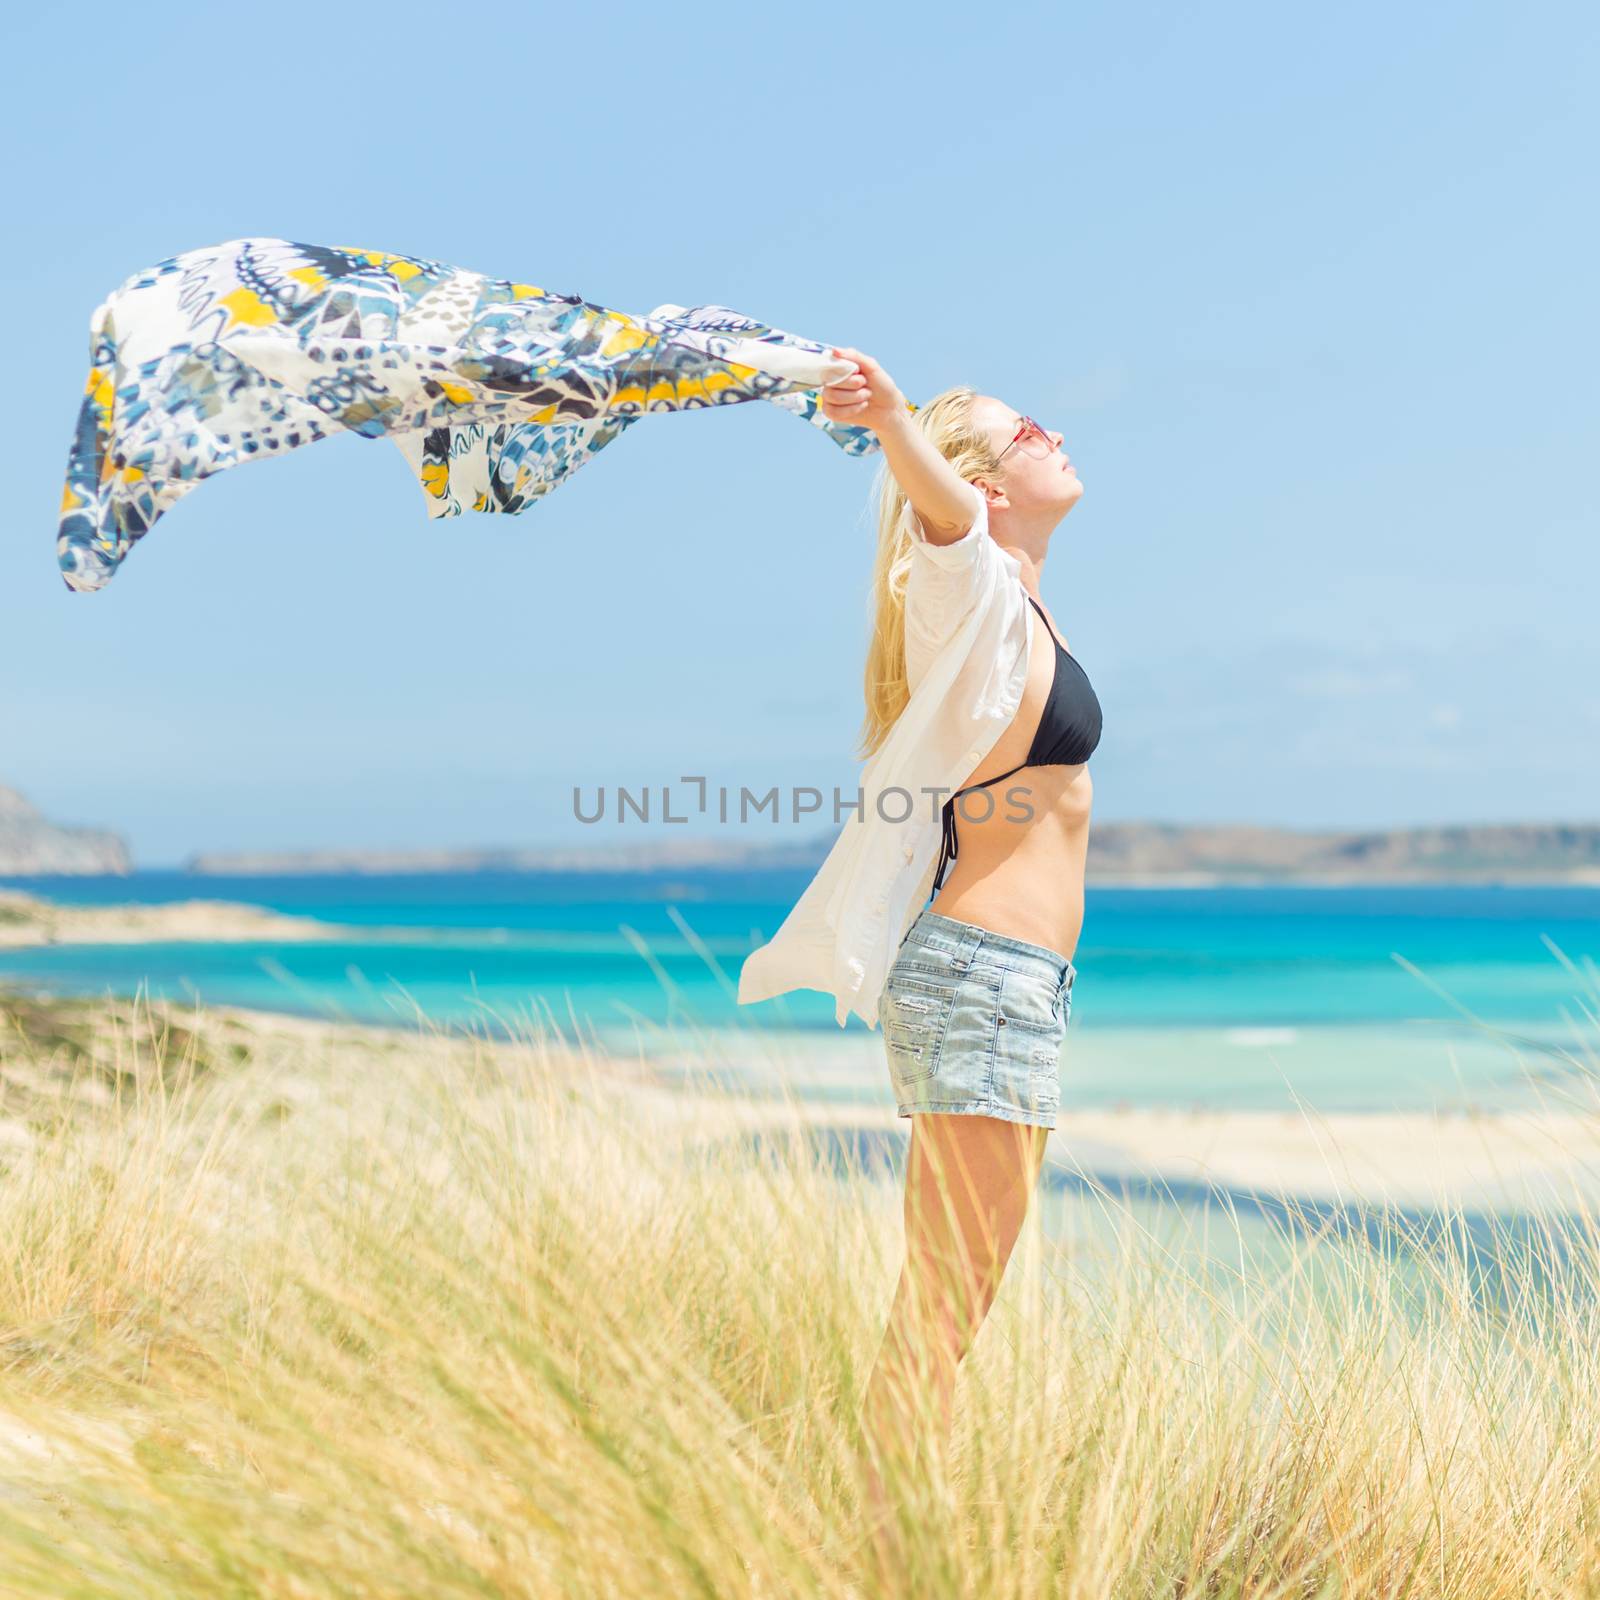 Relaxed woman, arms raised, holding colorful scarf, enjoying sun, freedom and life at beautiful beach. Young lady feeling free, relaxed and happy. Concept of vacations, freedom, joy and well being.